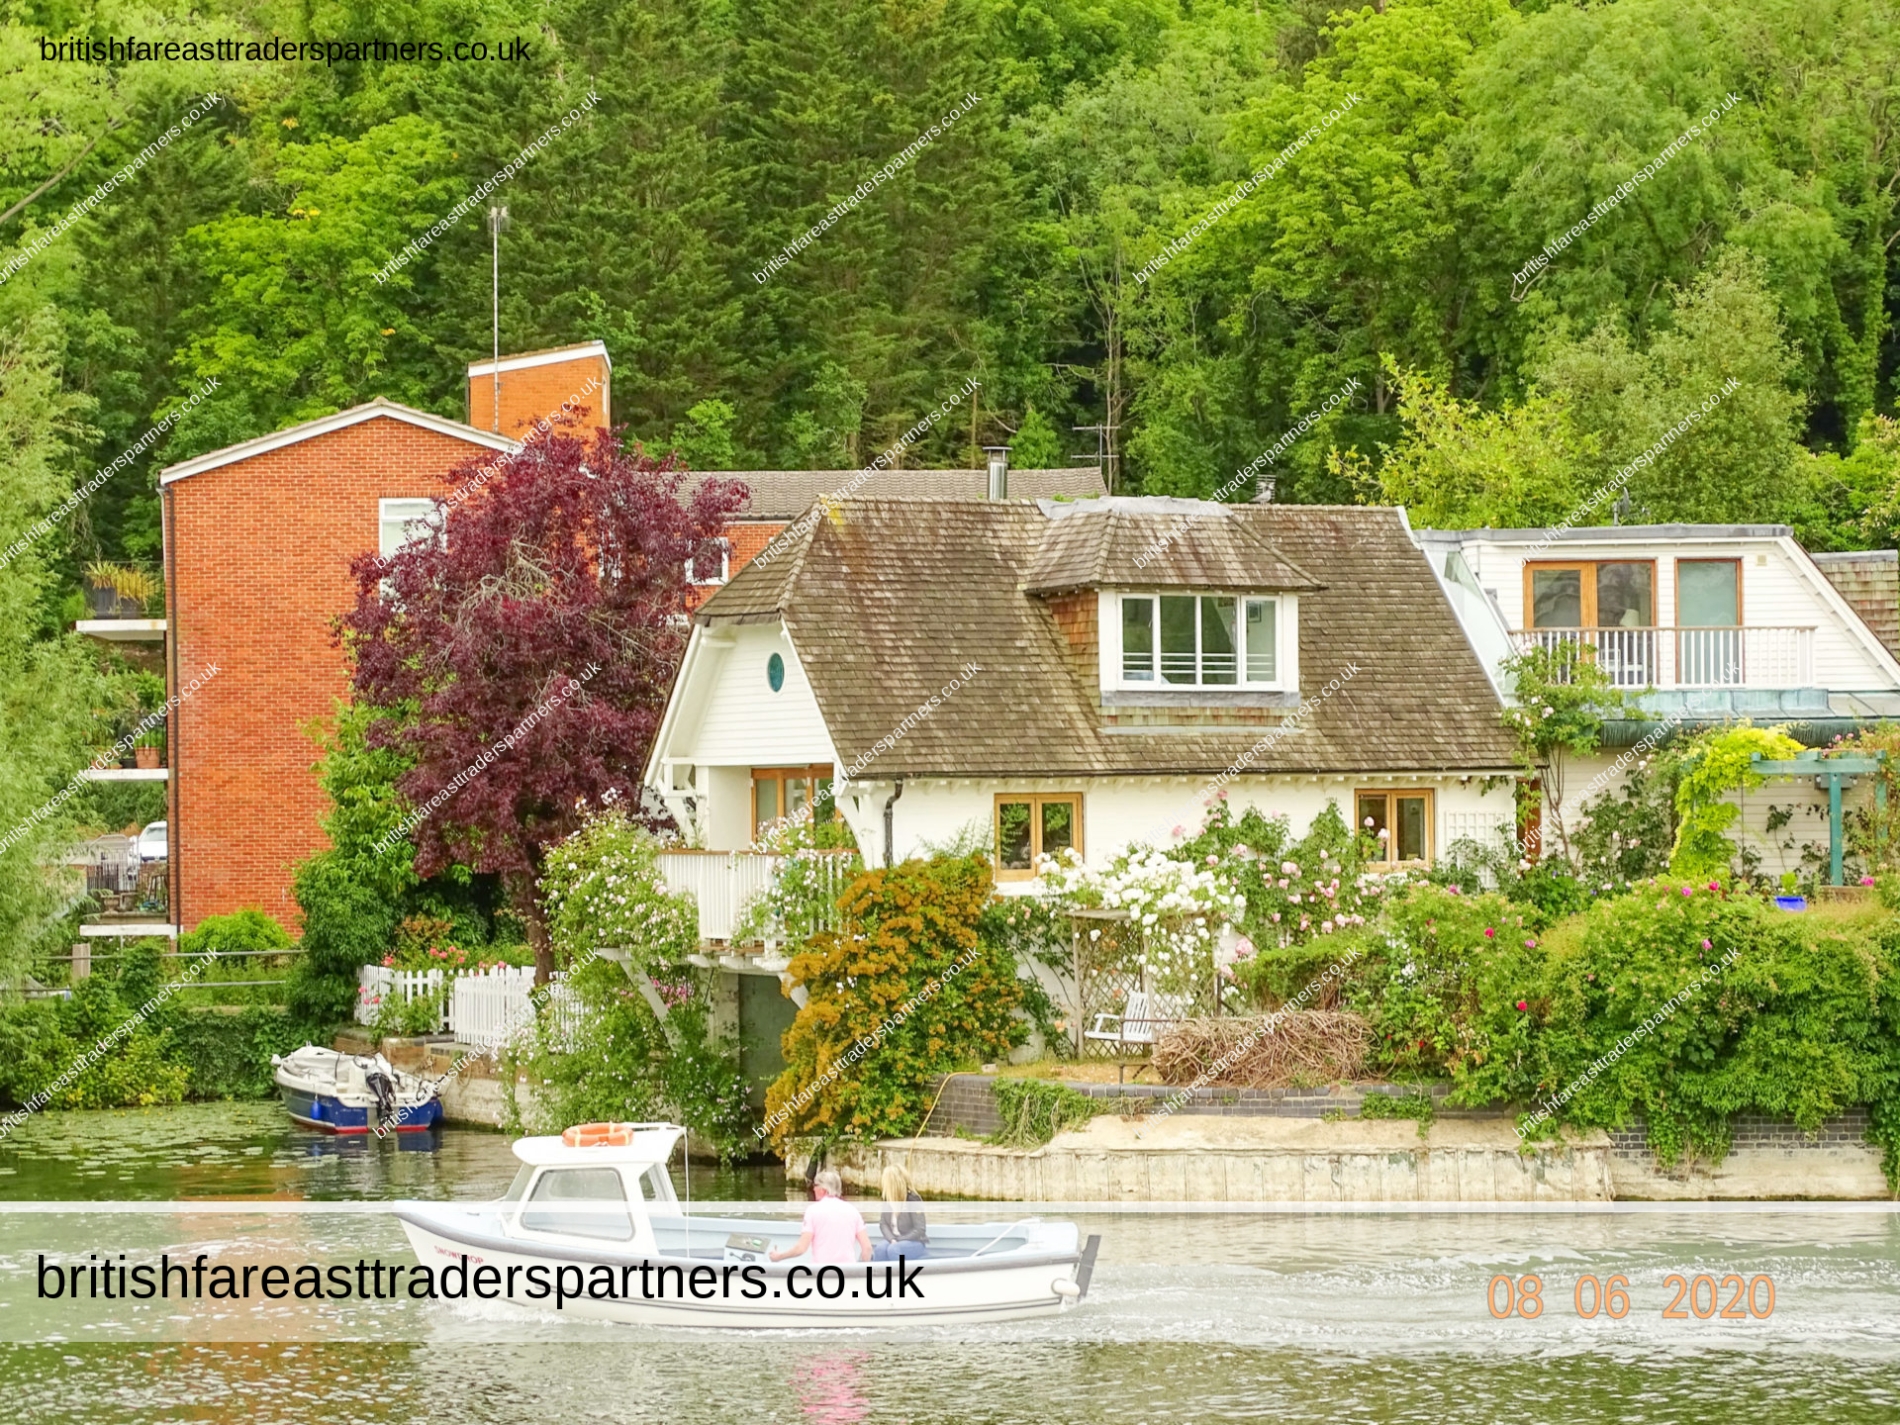 BEAUTIFUL & RELAXING ENGLISH RIVER WALKS: HENLEY-ON-THAMES, OXFORDSHIRE, ENGLAND | RELAX | UNWIND | DAYS OUT IN ENGLAND | WALKS | WELLBEING | THAMES RIVER